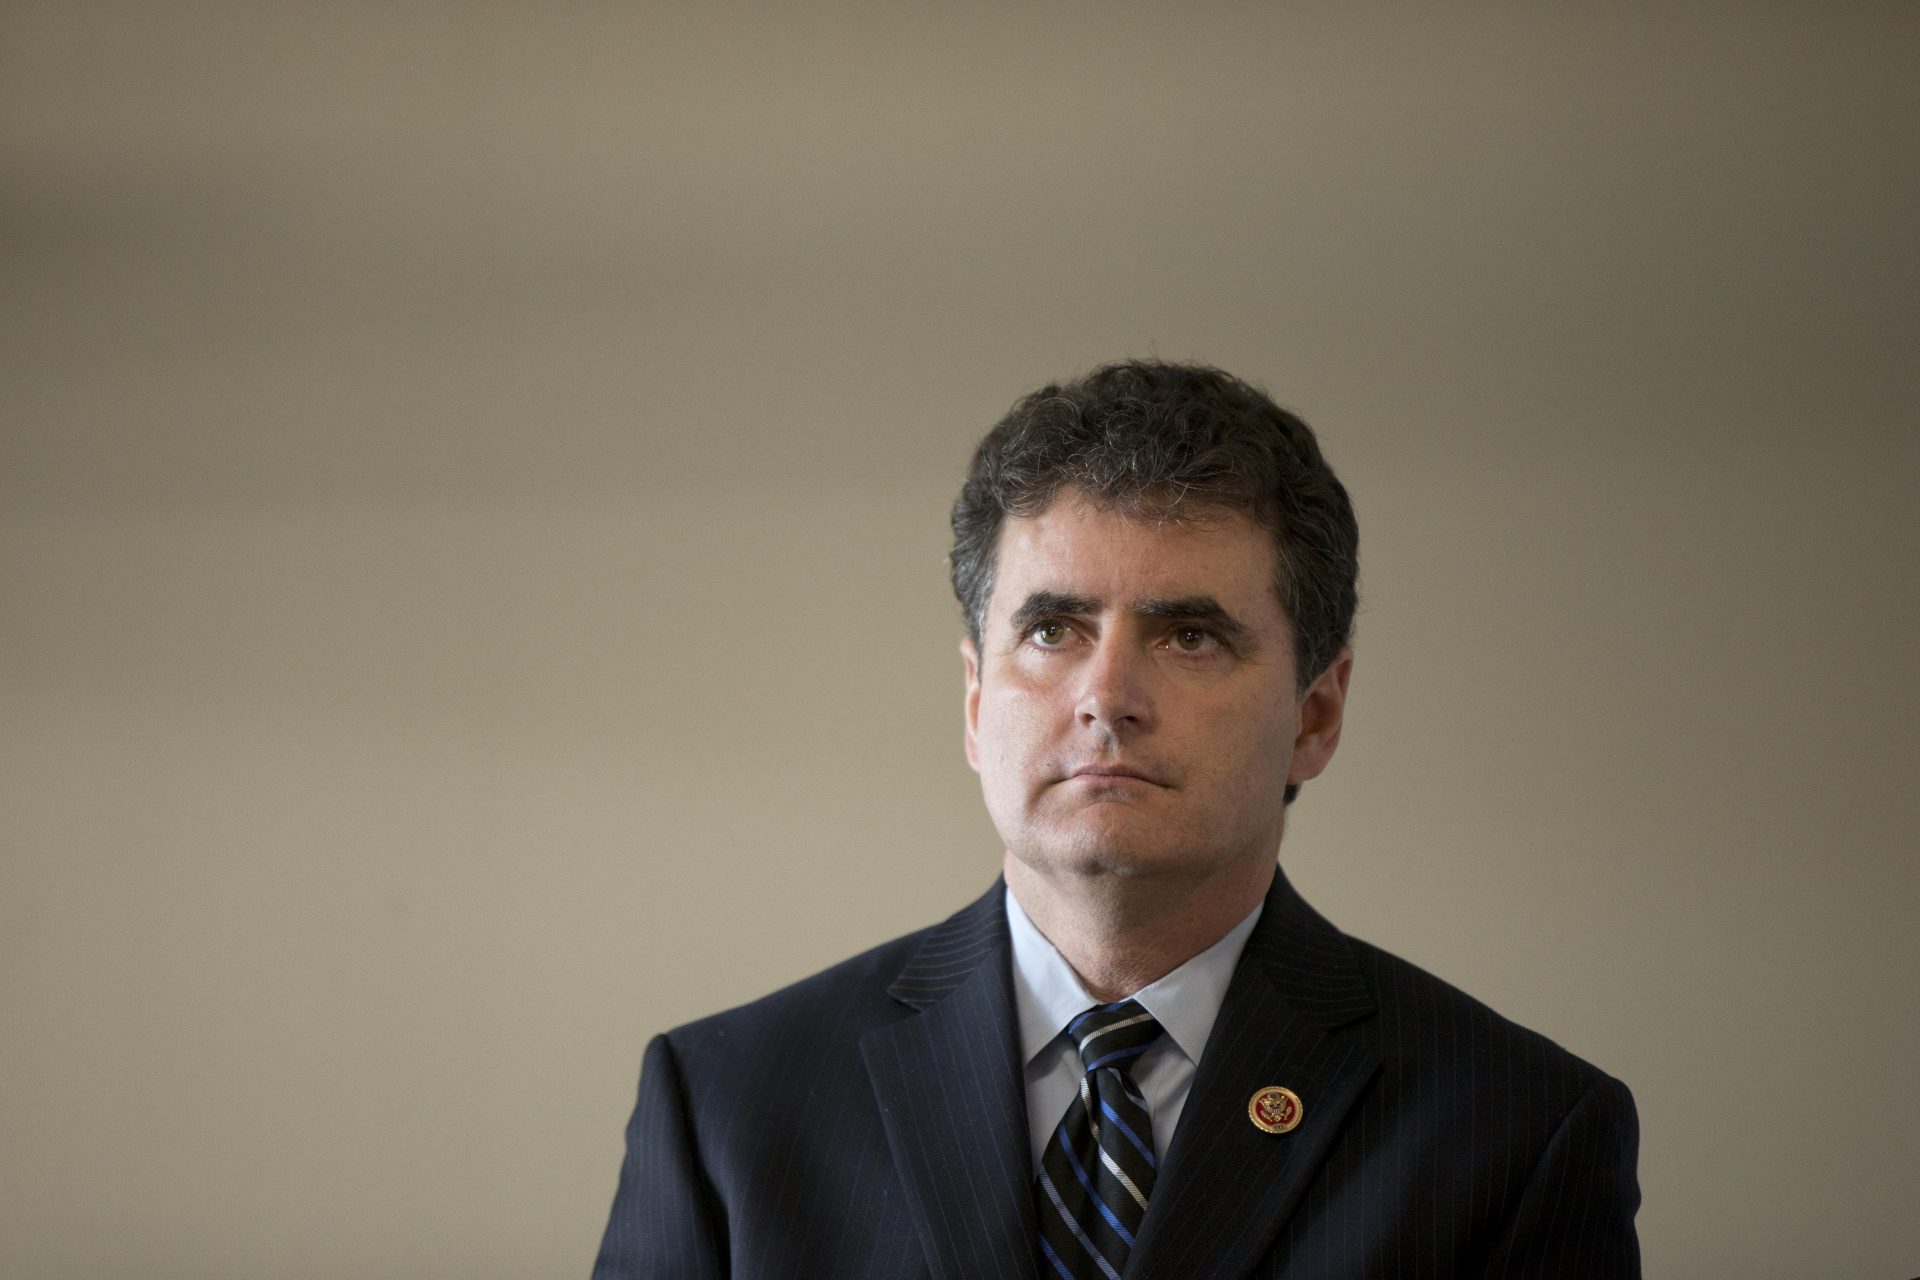 Rep. Mike Fitzpatrick, R-Pa., listens during a news conference Monday, Feb. 10, 2014, at a Fraternal Order of Police lodge in Philadelphia